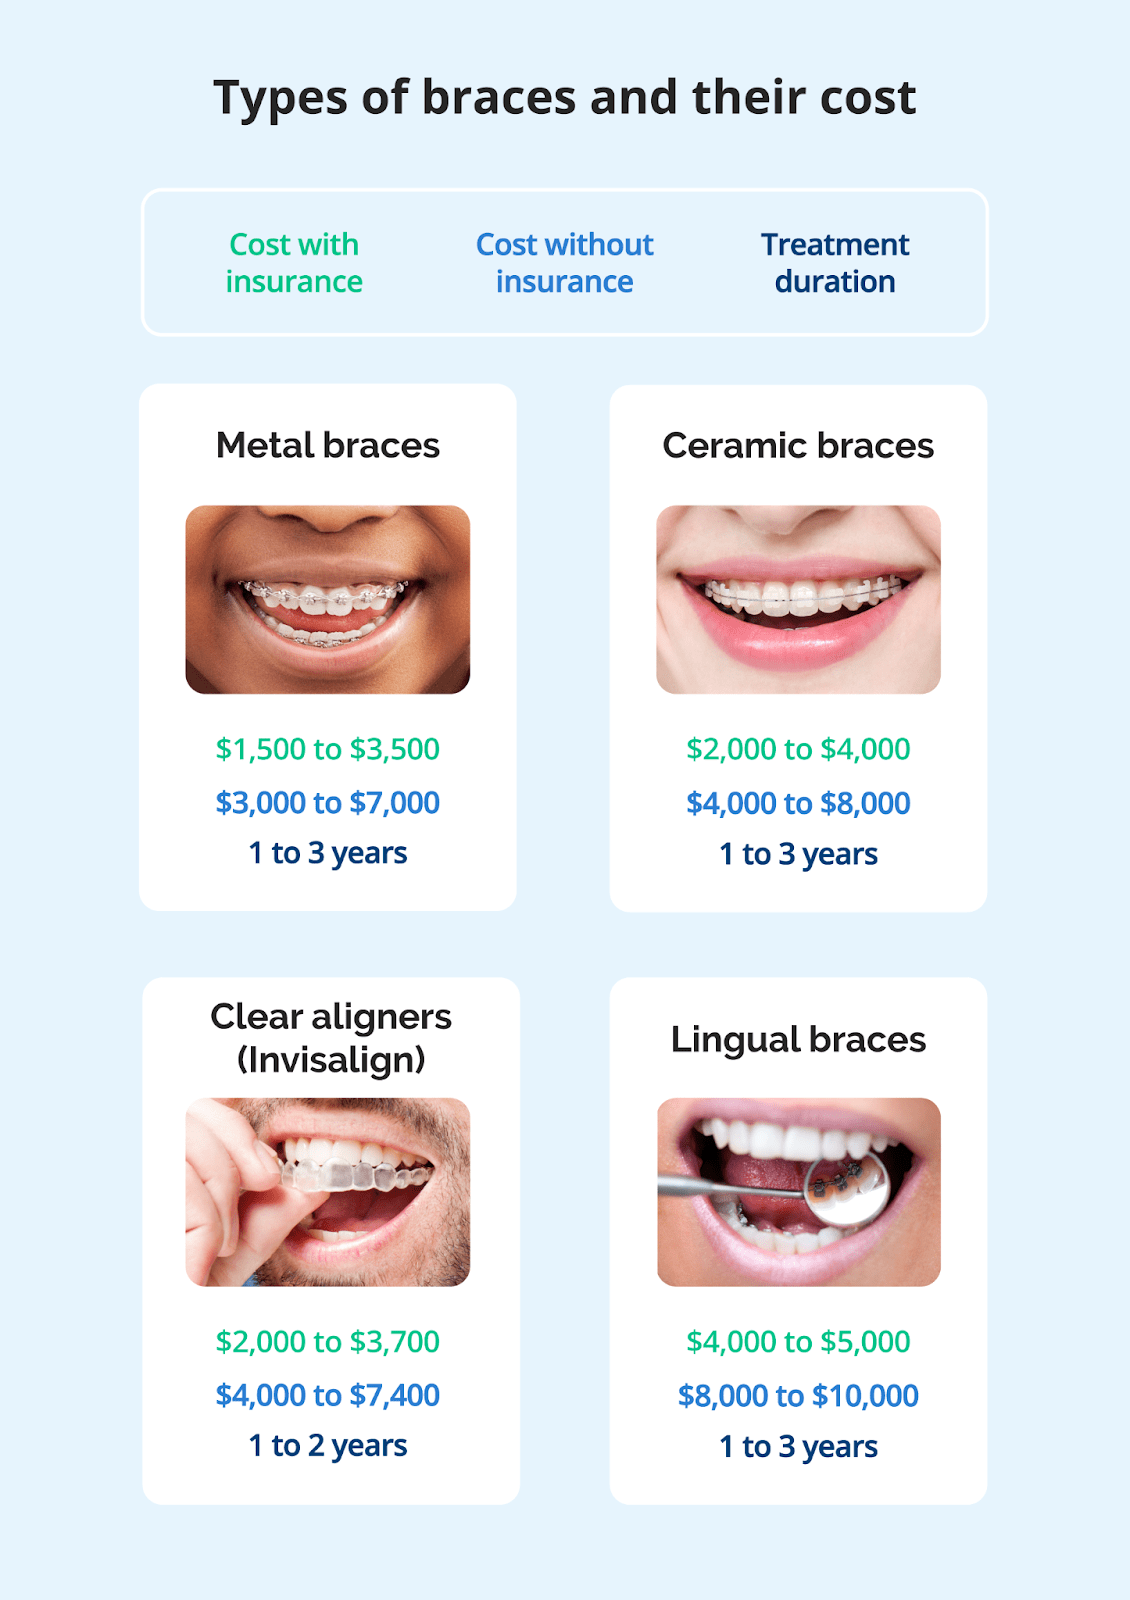 An informational graphic shows the cost associated with different types of braces